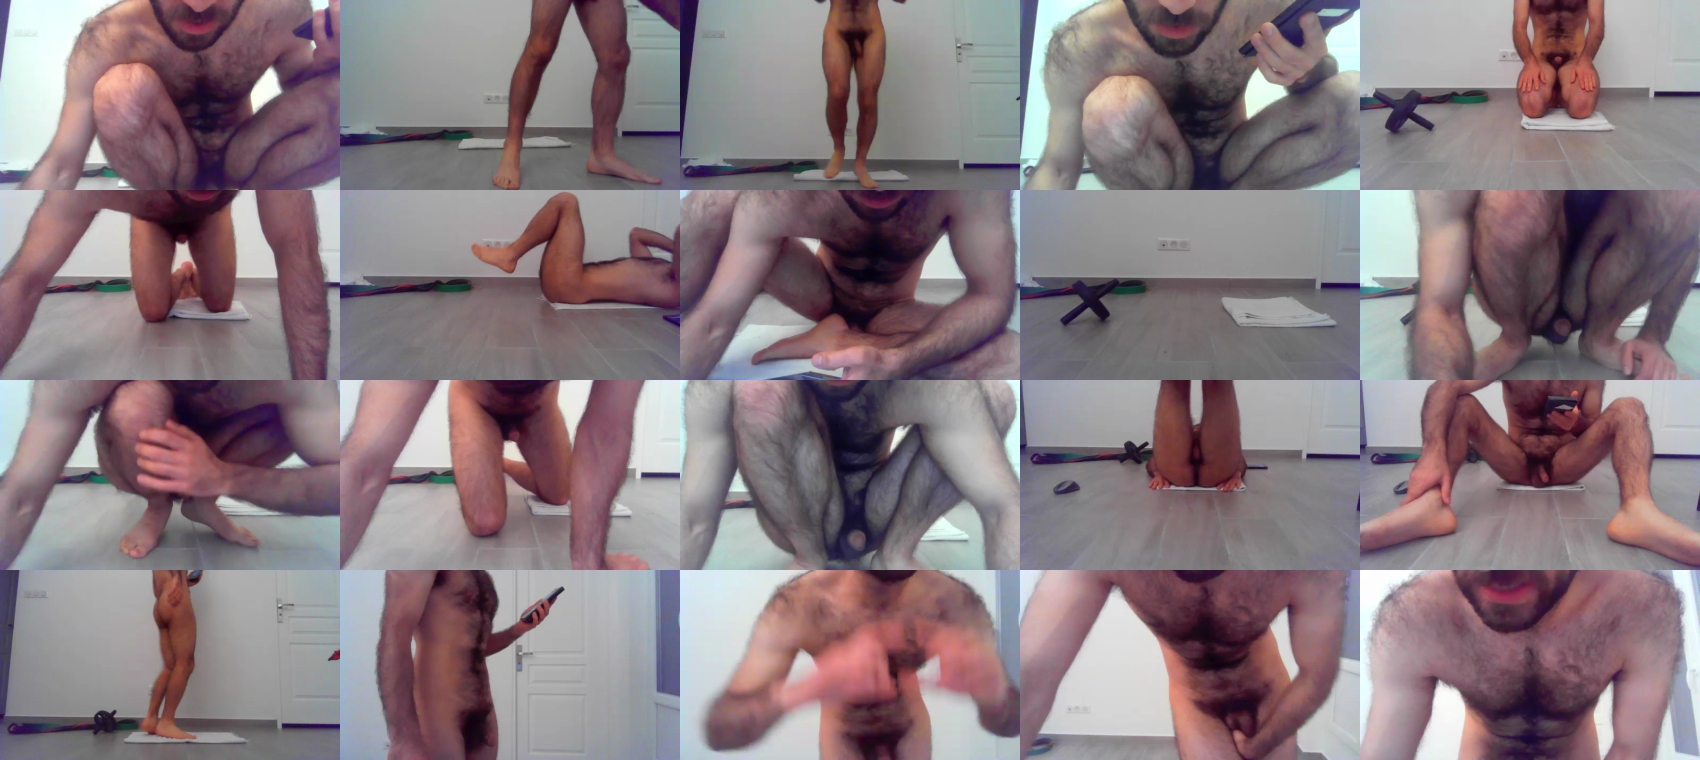 Hairy_sexy_man  29-12-2021 Recorded Video yummy